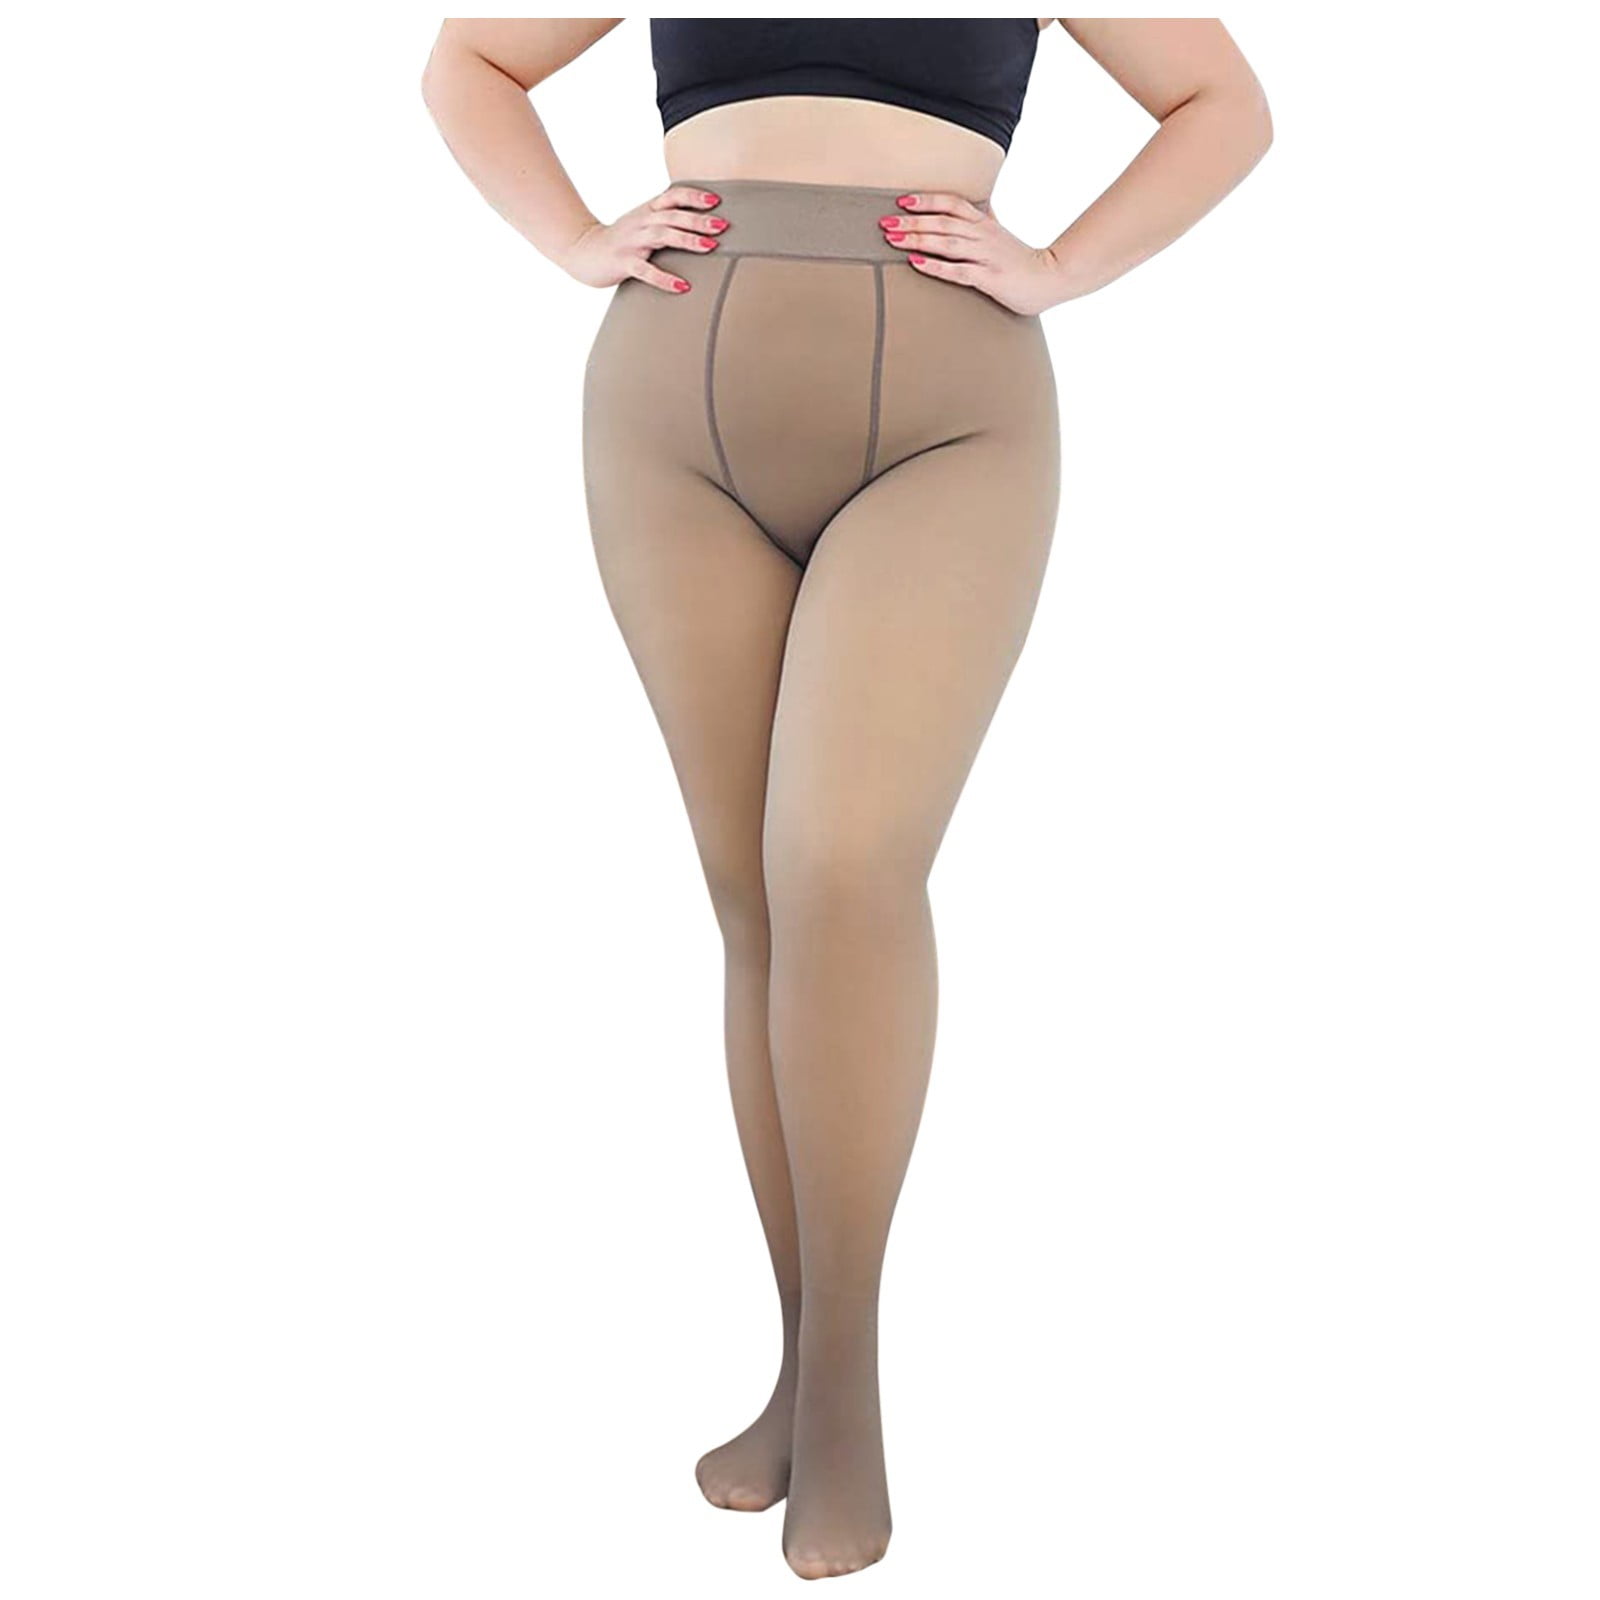 Calzitaly High Waist Tights Control Top Shaping Nylons, 20 Denier Pantyhose  (L, SOLEIL) 